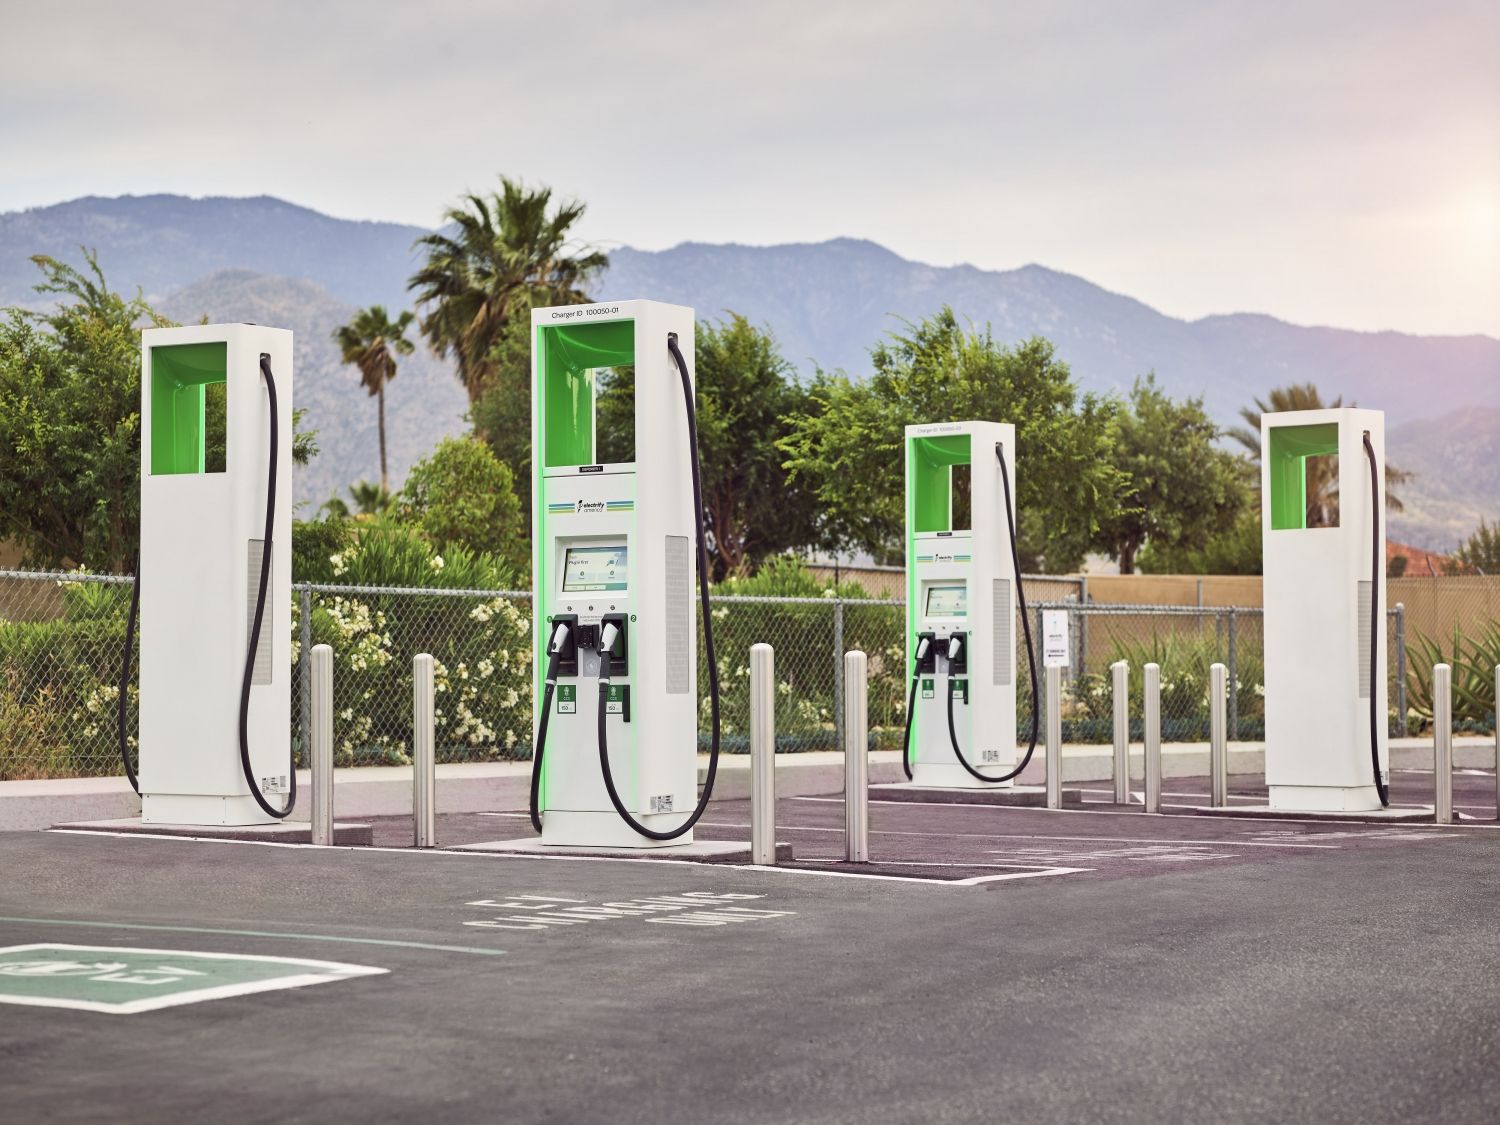 electrify america charging station empty in front of mountain landscape